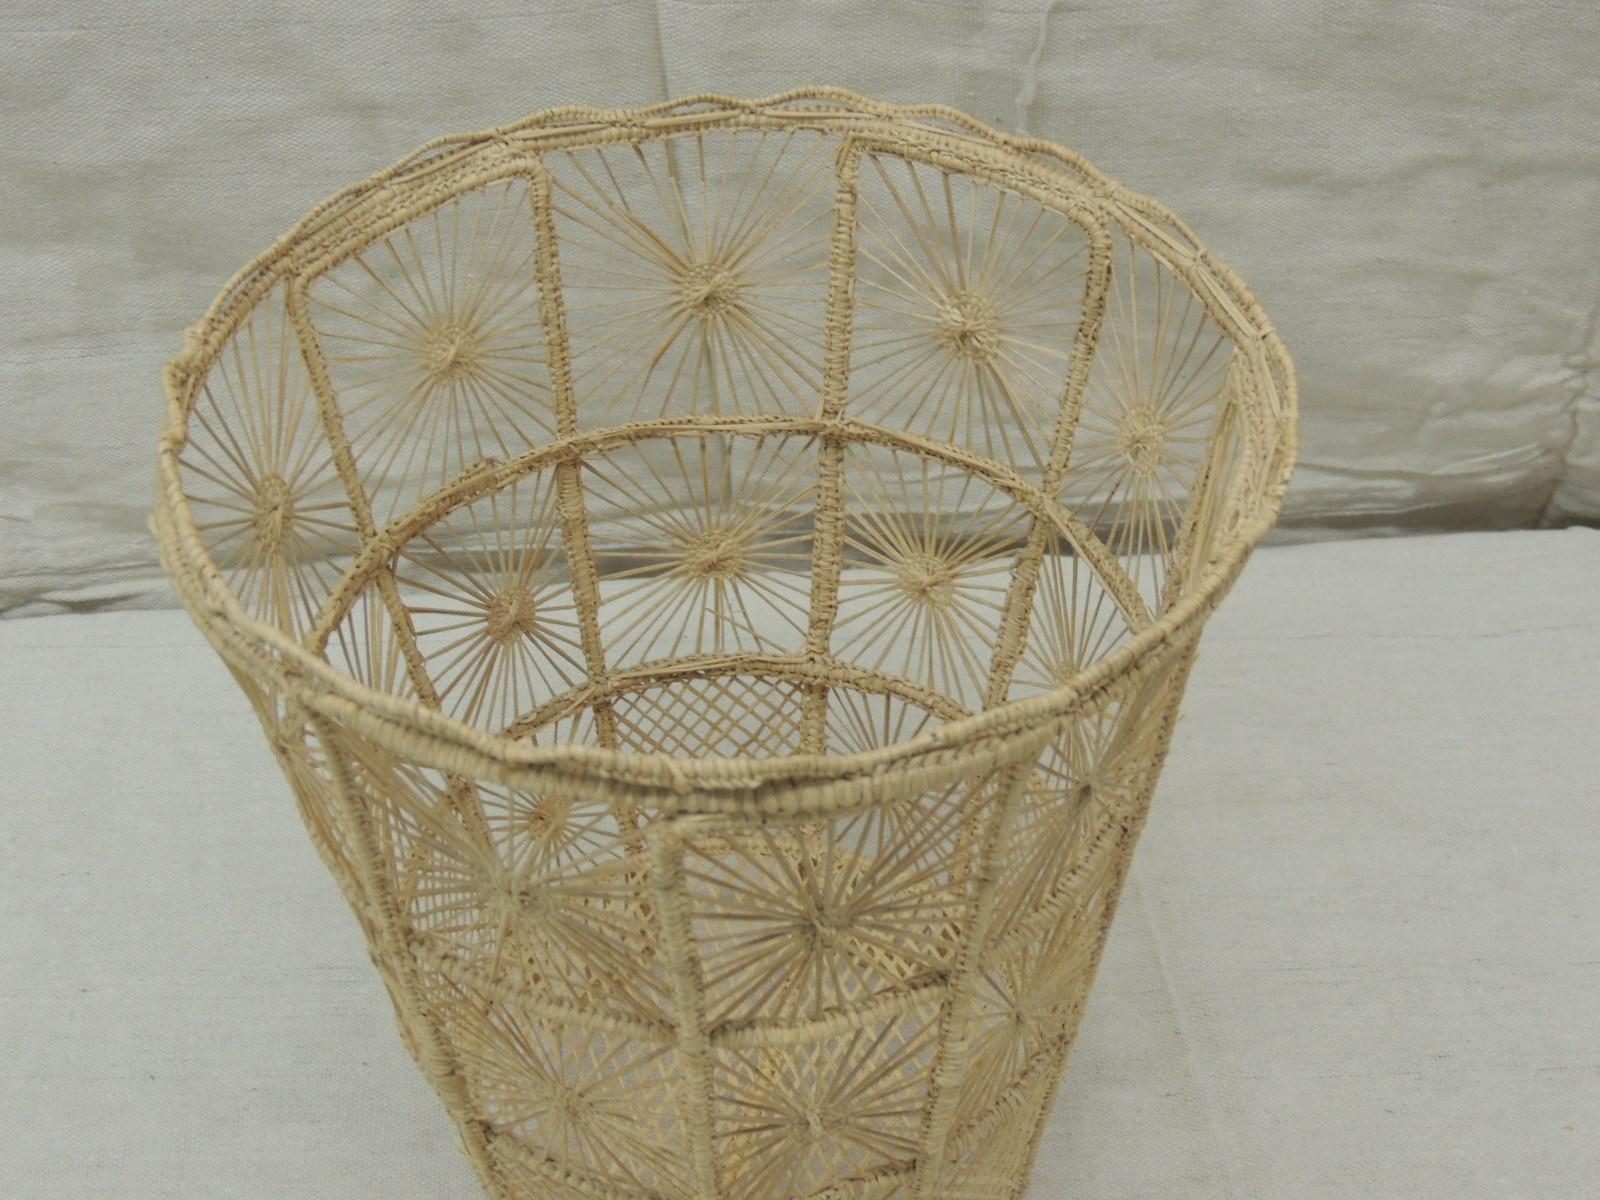 Vintage Italian lace style wastebasket
Round with spider web embellishments all-over with five petite legs and with trellis embellishments as well.
Never been used free of any marks
Size: 9